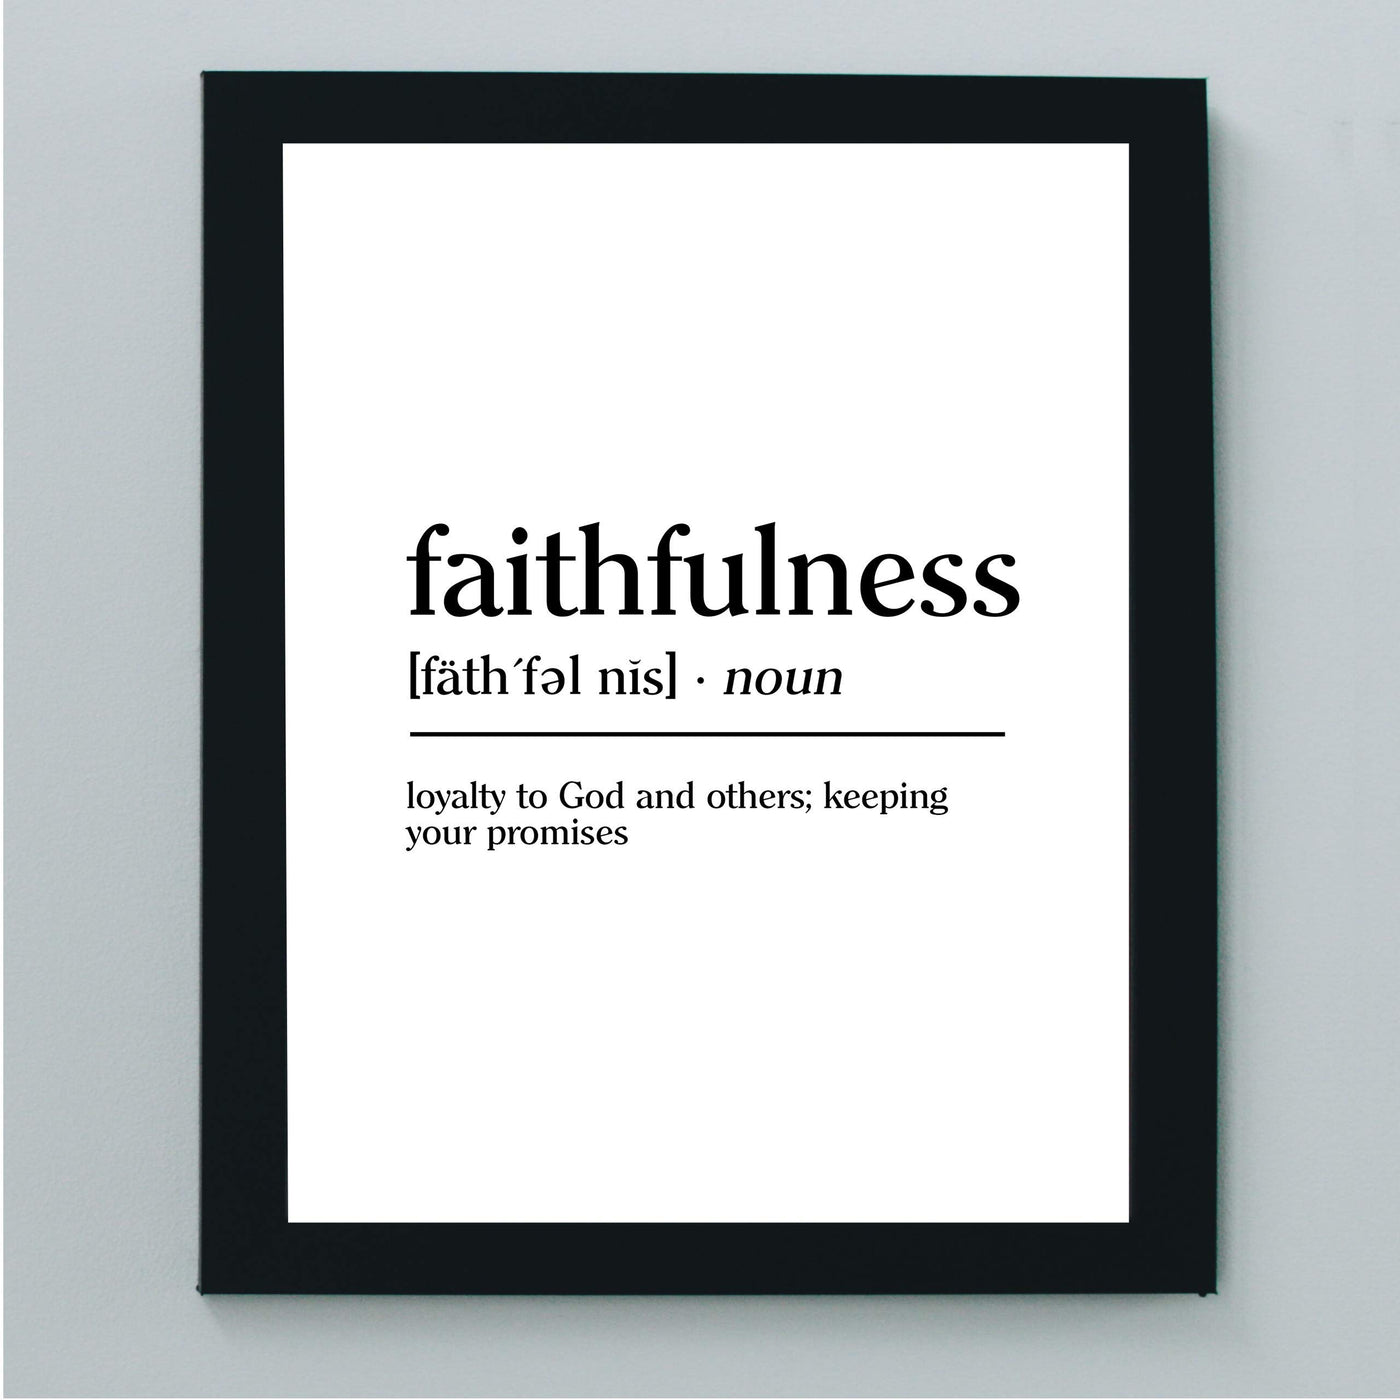 Faithfulness-Loyalty to God & Others Inspirational Christian Wall Art-8 x 10" Typographic"Gifts of the Spirit" Print-Ready to Frame. Home-Office-Church-Sunday School Decor. Great Gift of Faith!